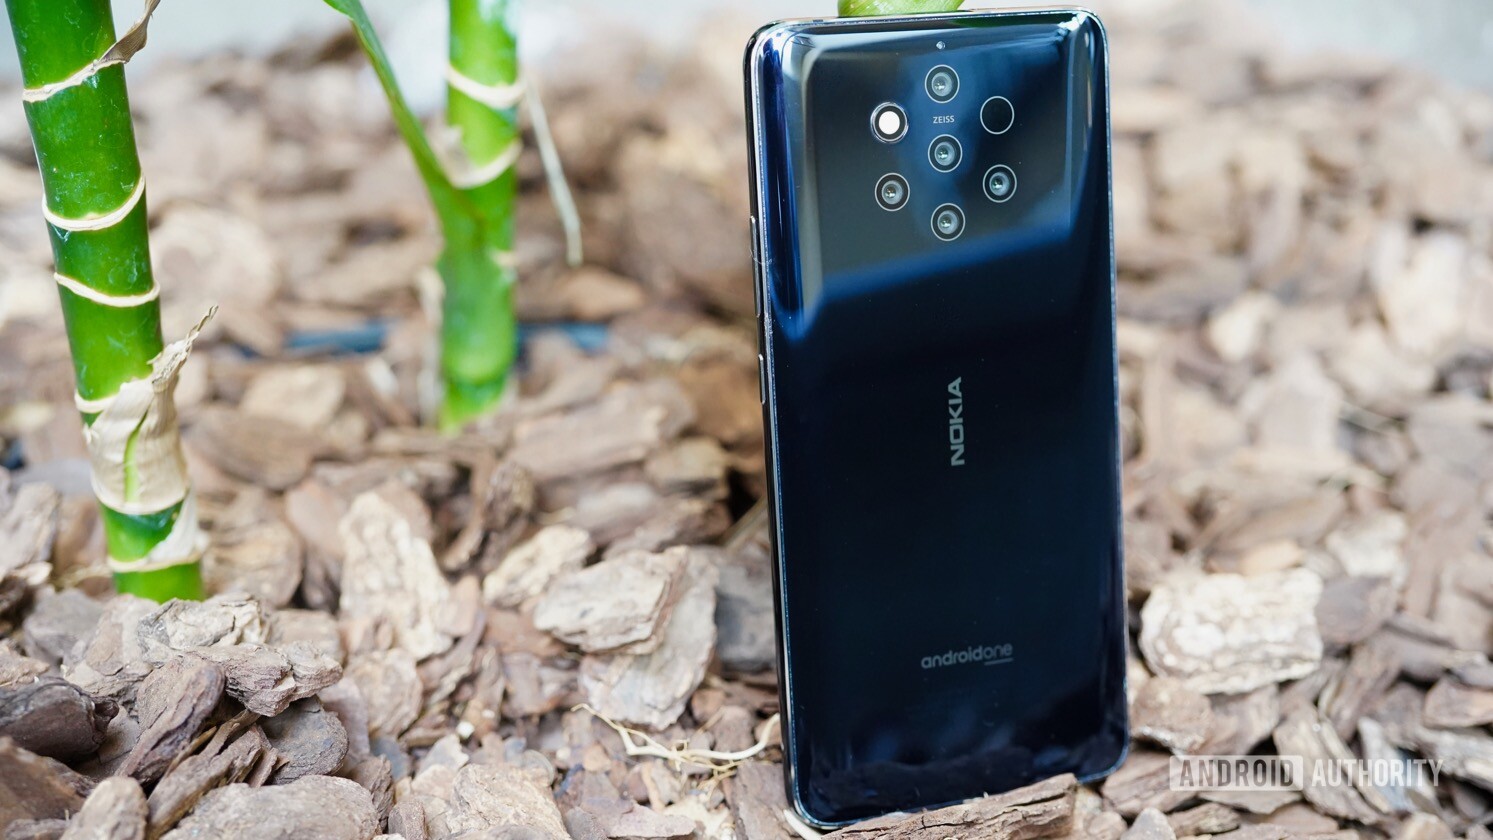 The Nokia 9.3 or 9.2 PureView looks set to pick up where the Nokia 9 left off.